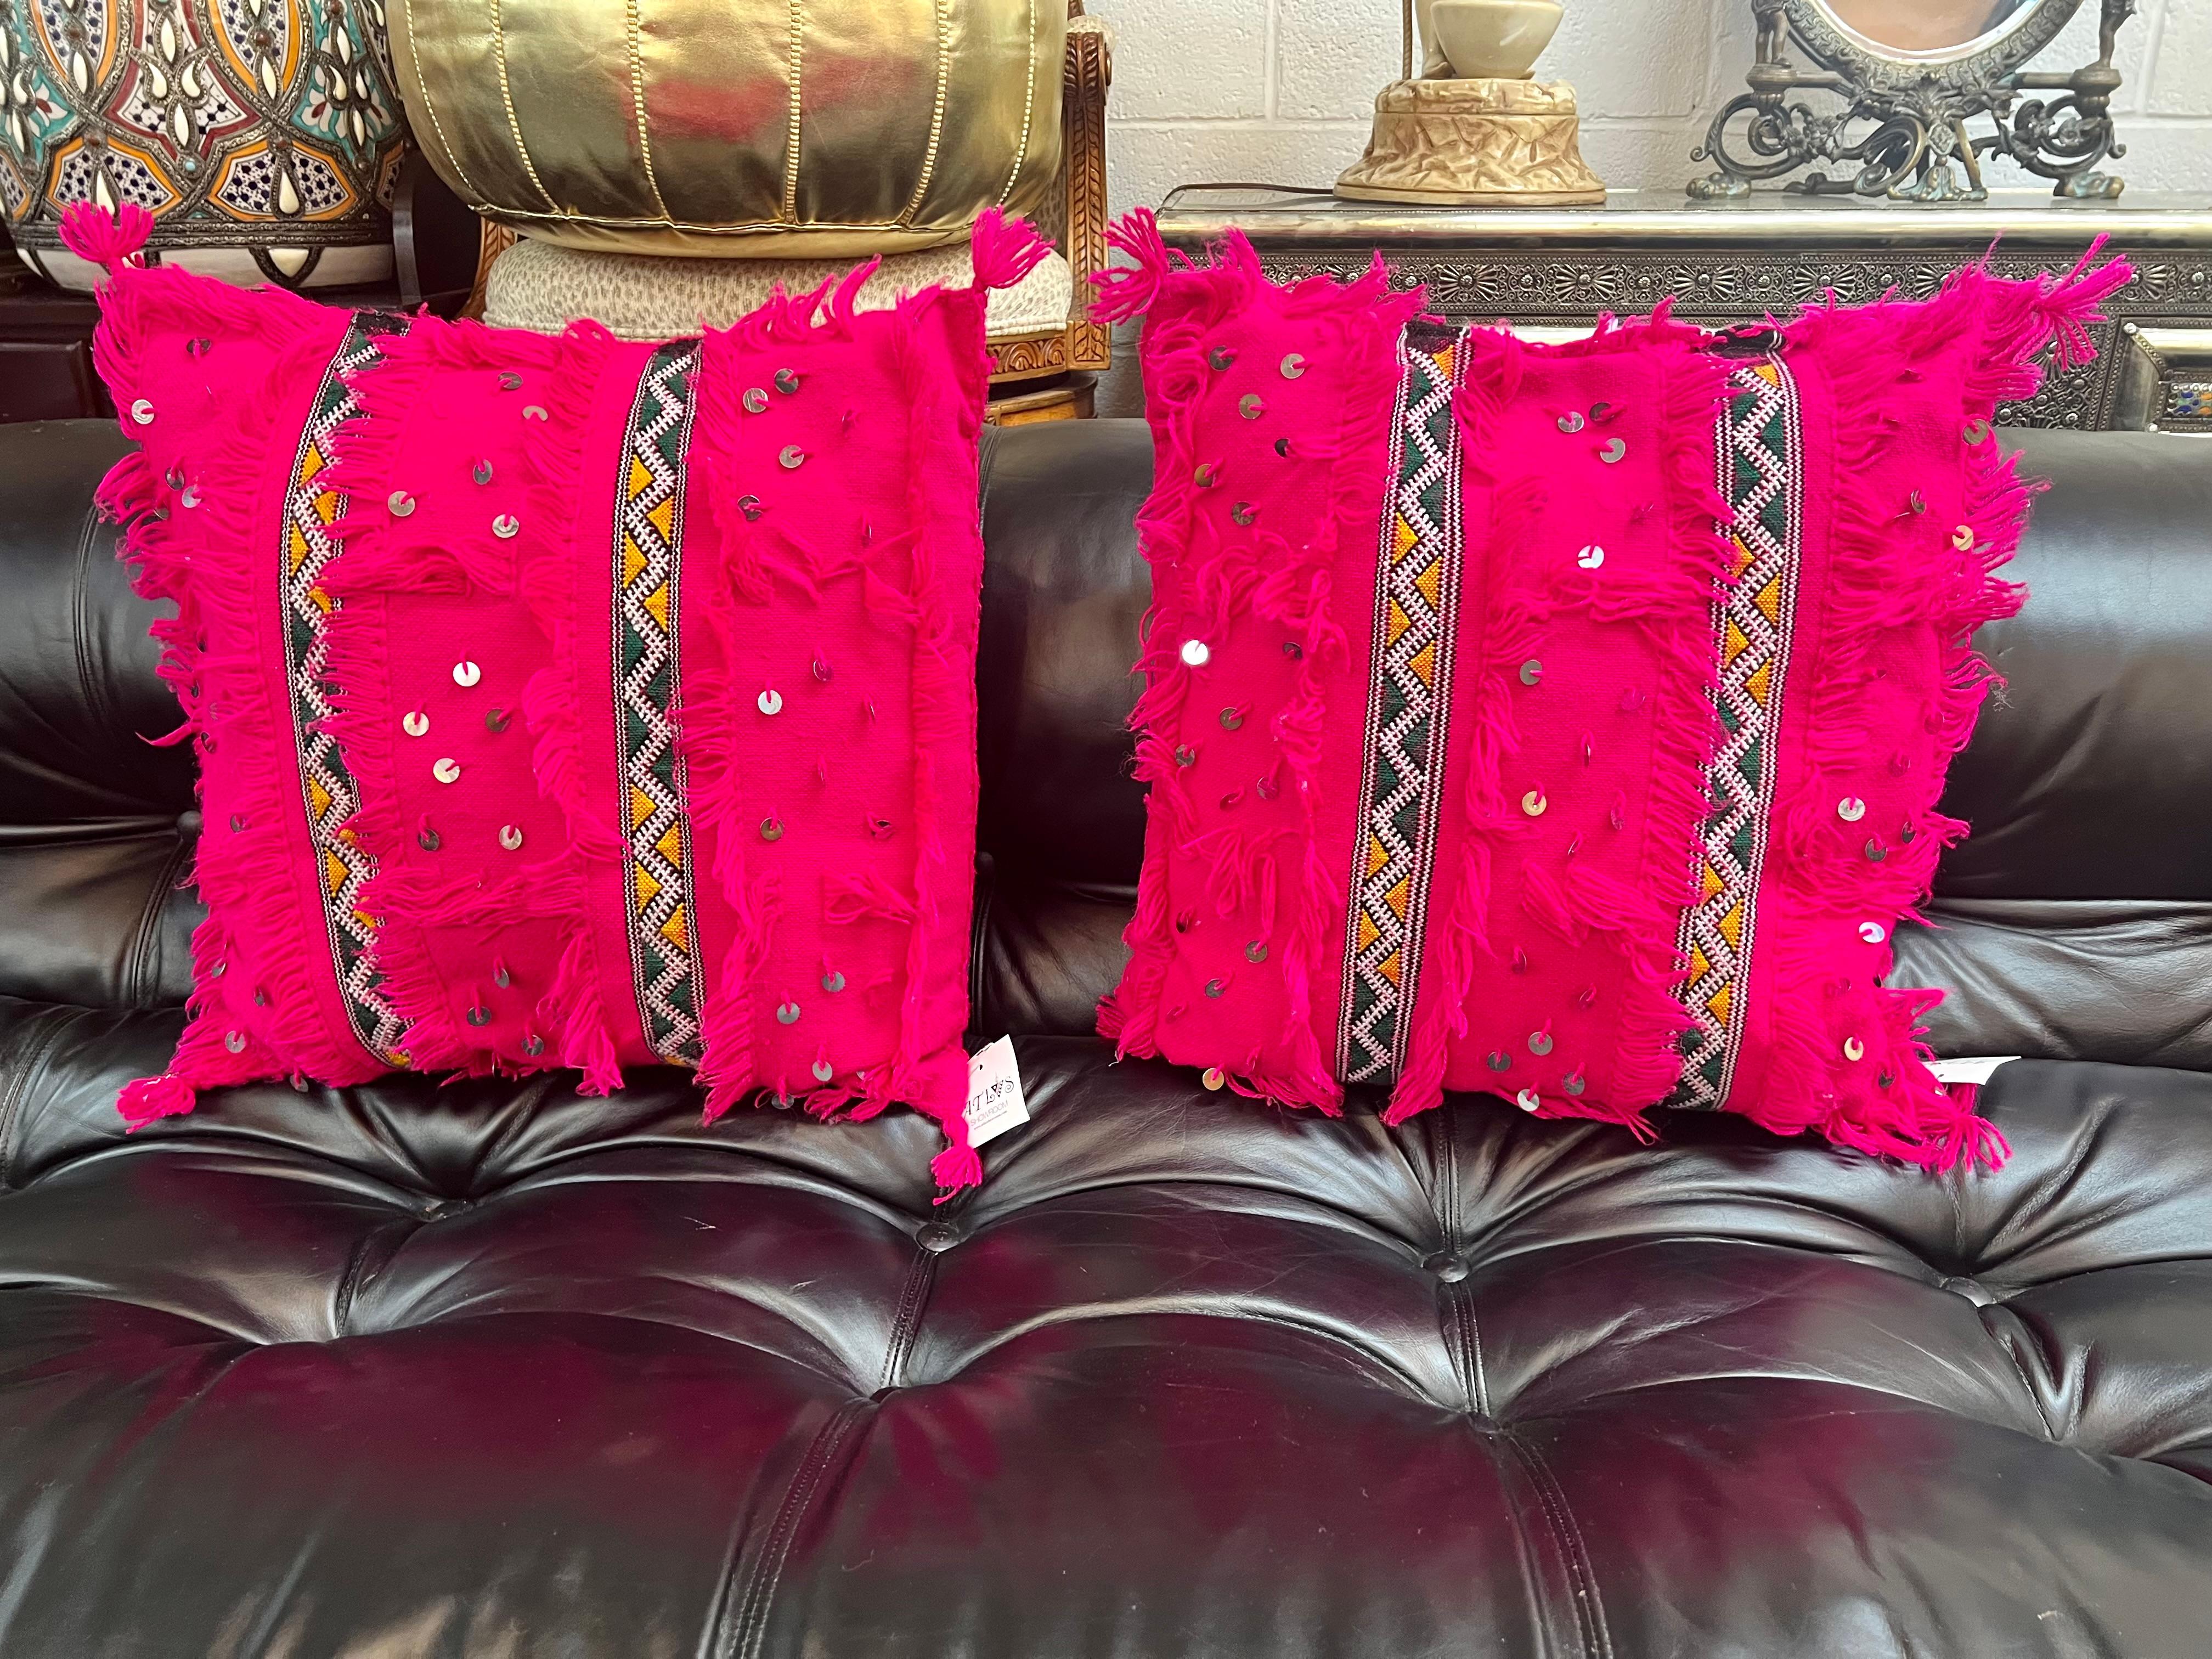 Hand-Woven Boho Chic Style Moroccan Pink Wedding Pillow, a Pair